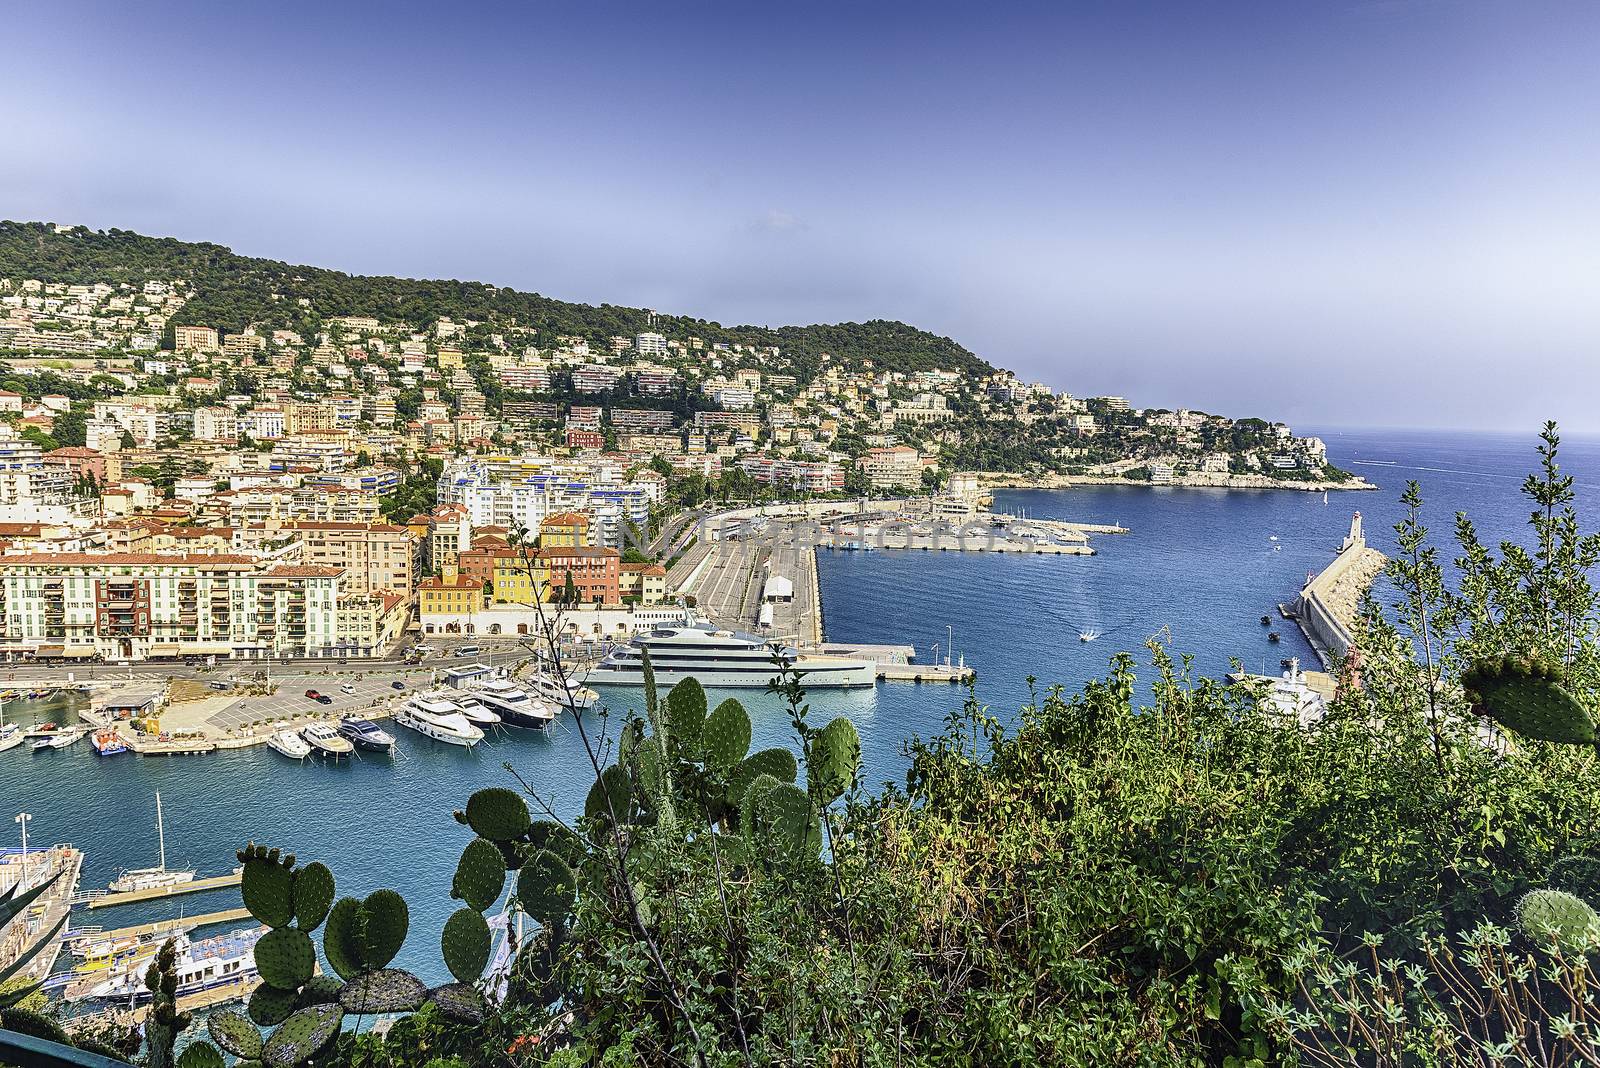 Scenic aerial view of the Port of Nice, aka Port Lympia, as seen from the Chateau hill, Nice, Cote d'Azur, France